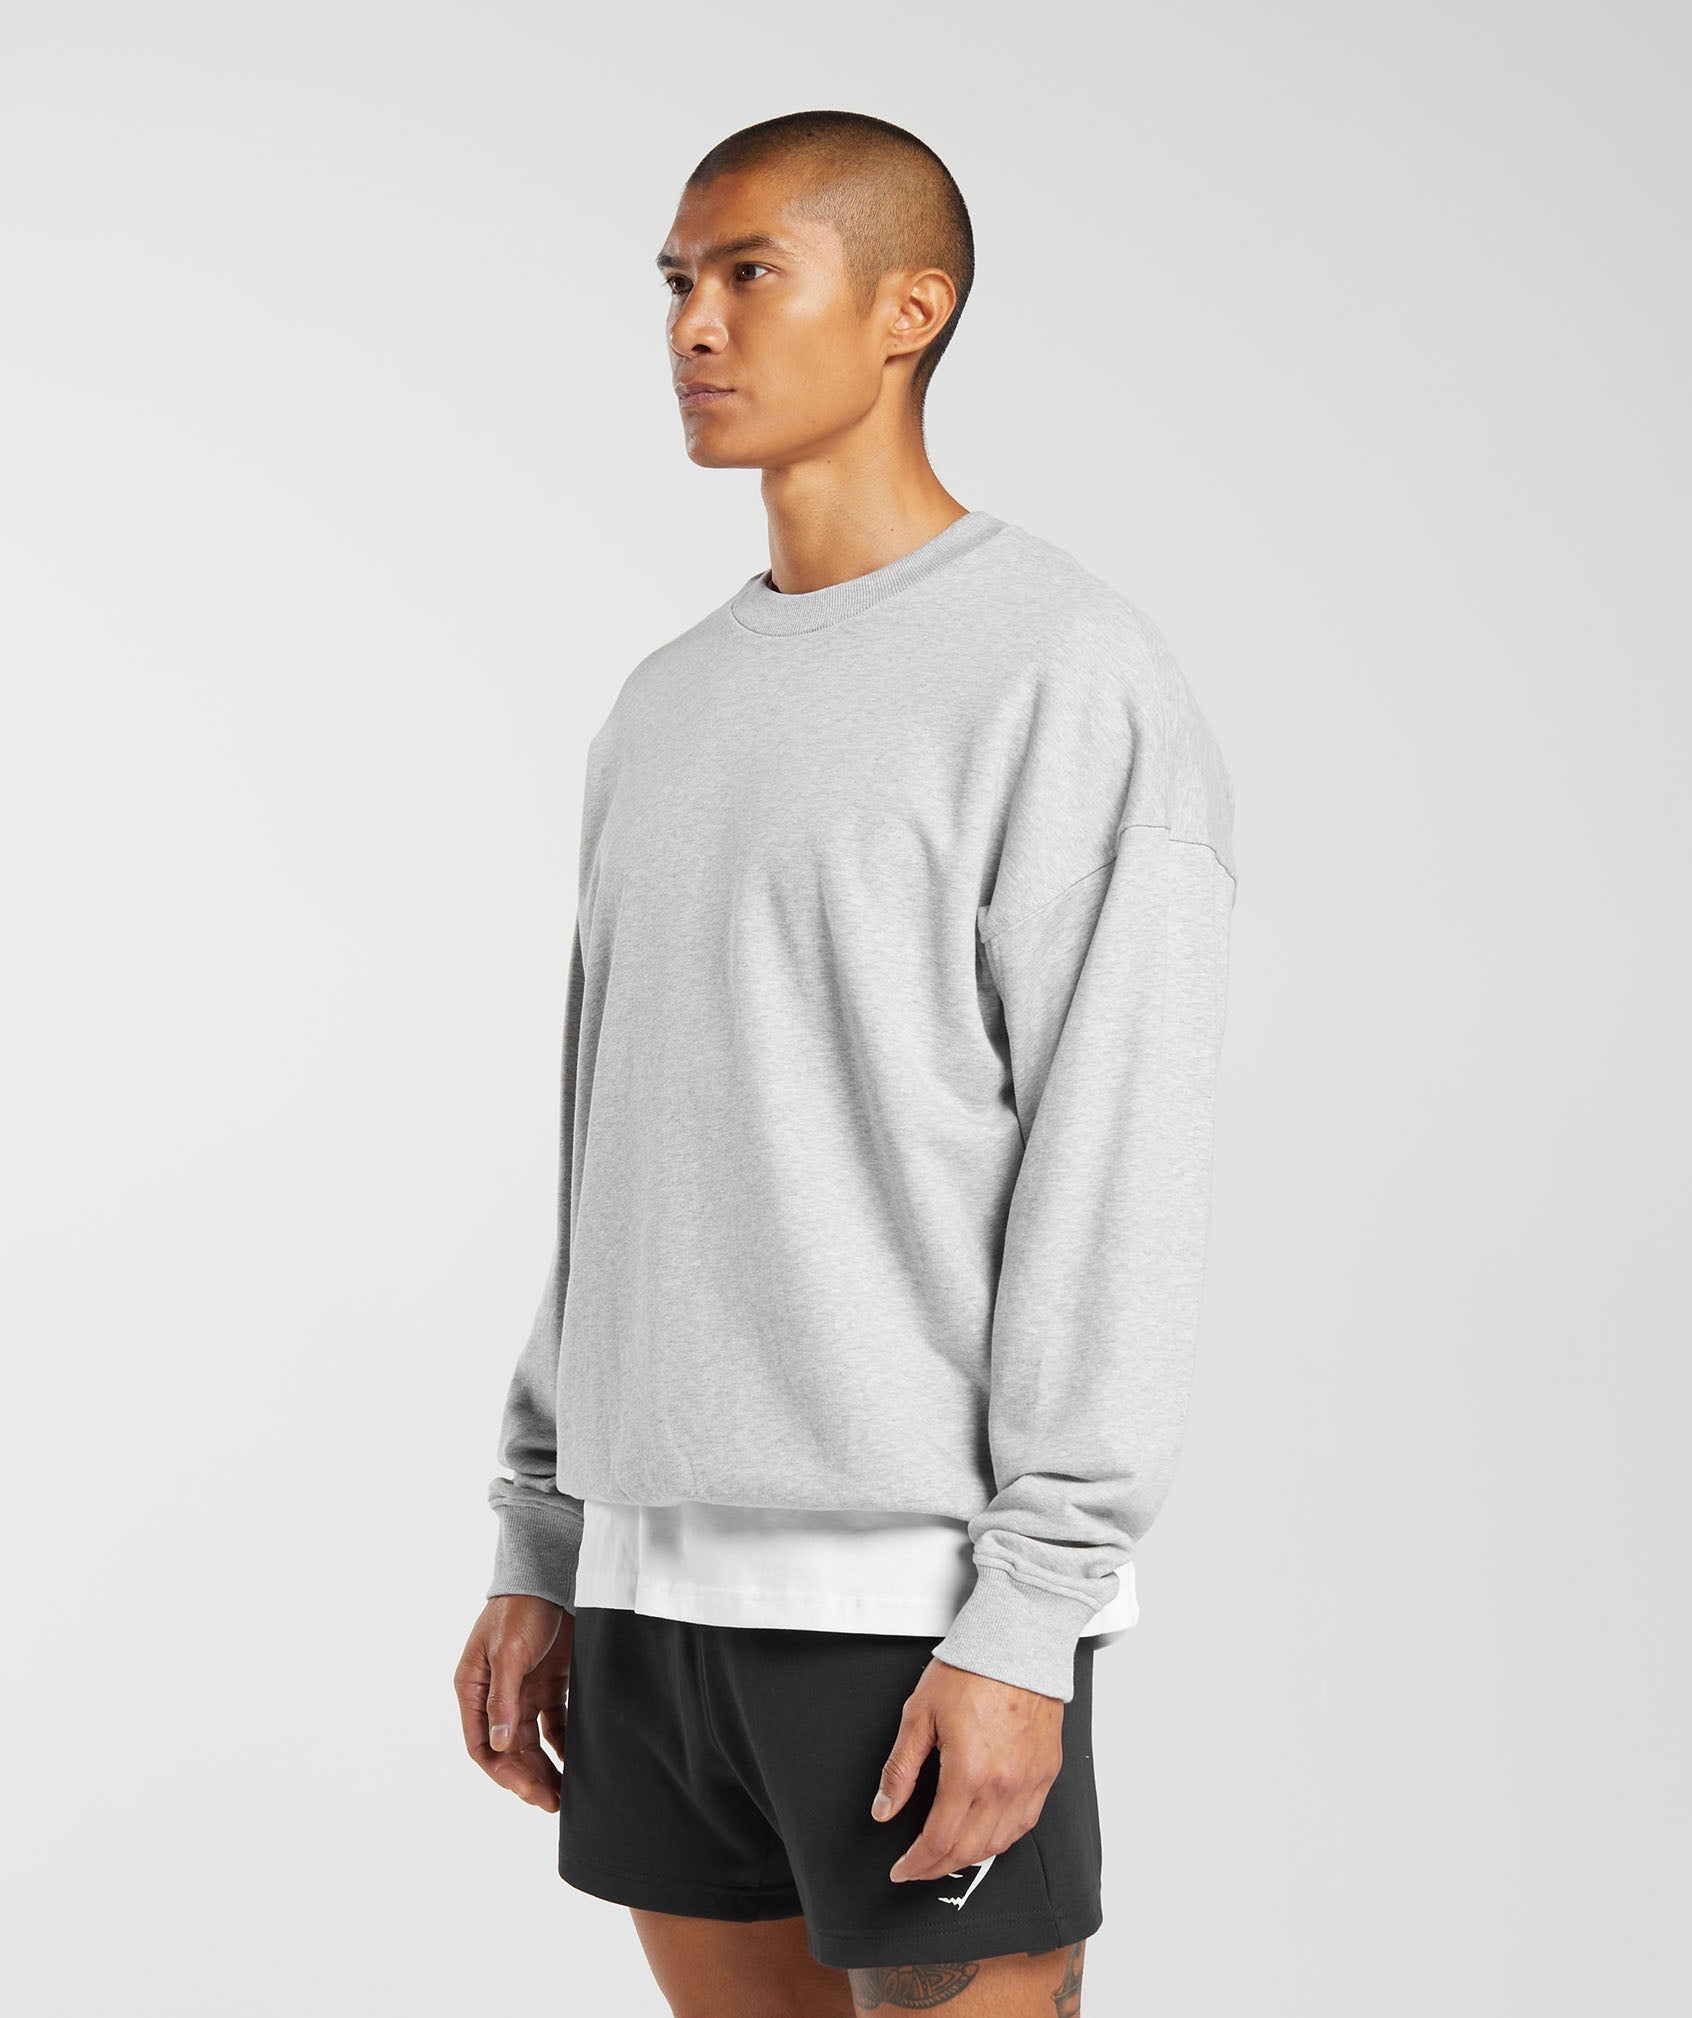 Rest Day Essential Crew in Light Grey Core Marl - view 3